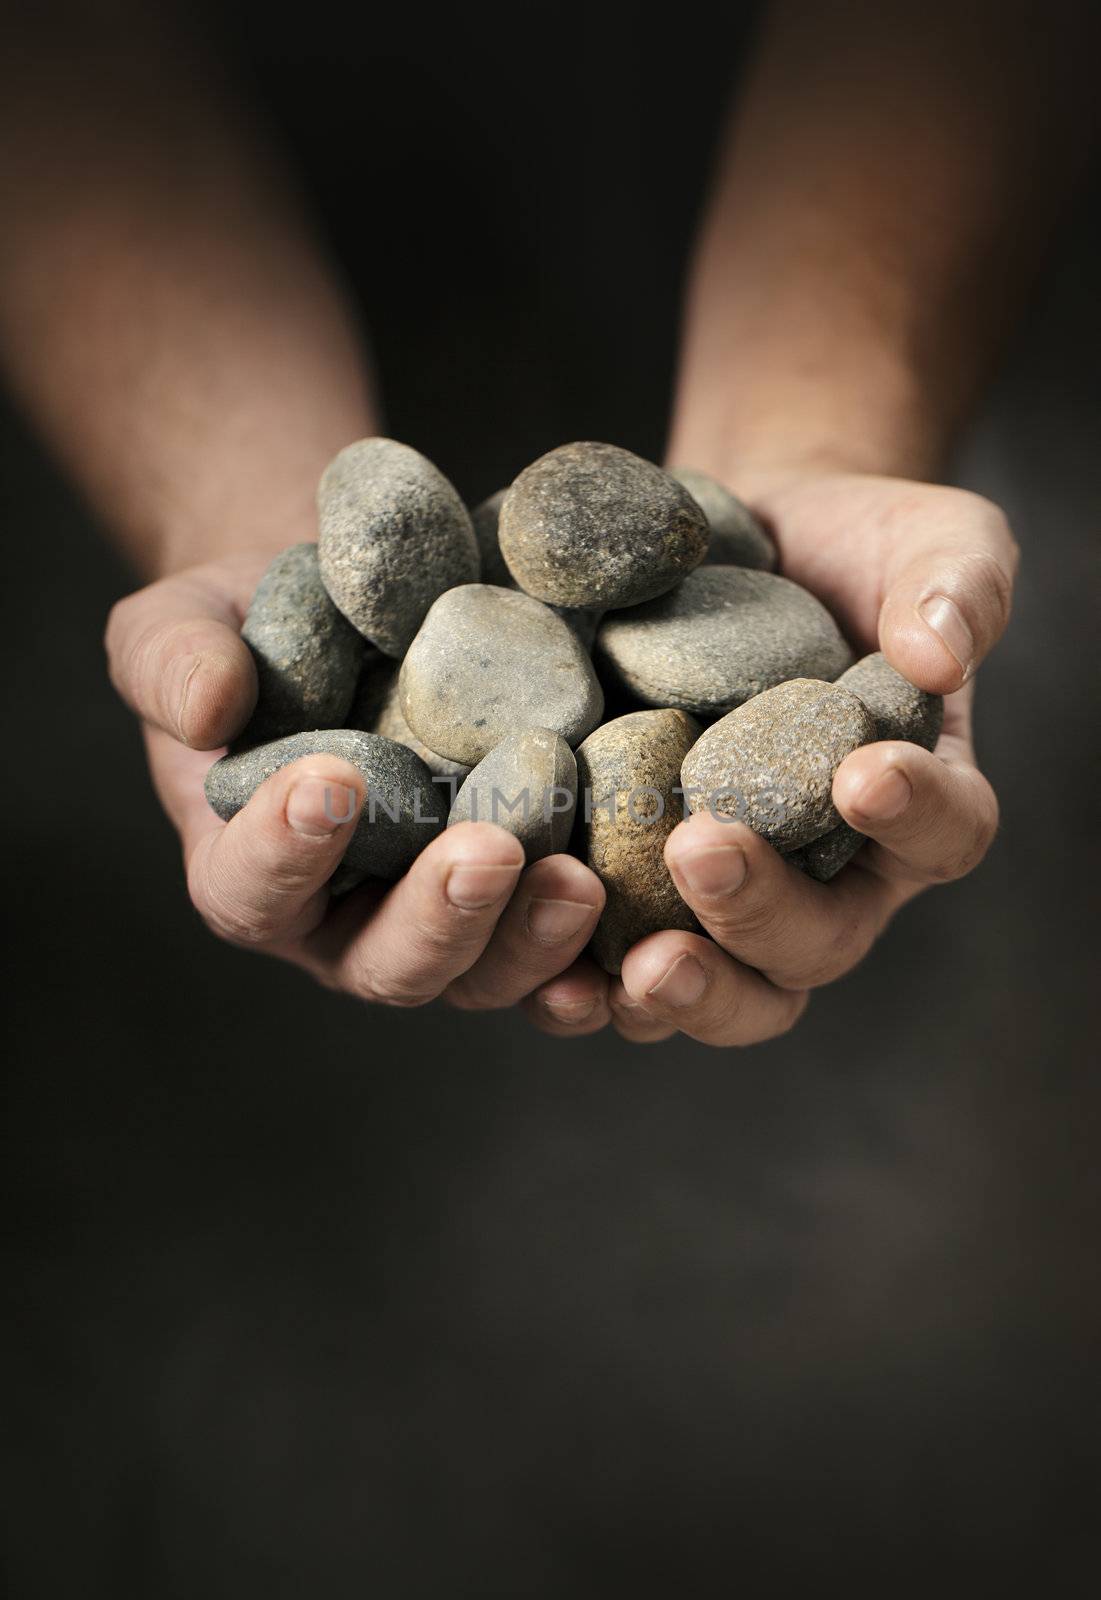 Man holding small rock pebbles in his cupped hands.